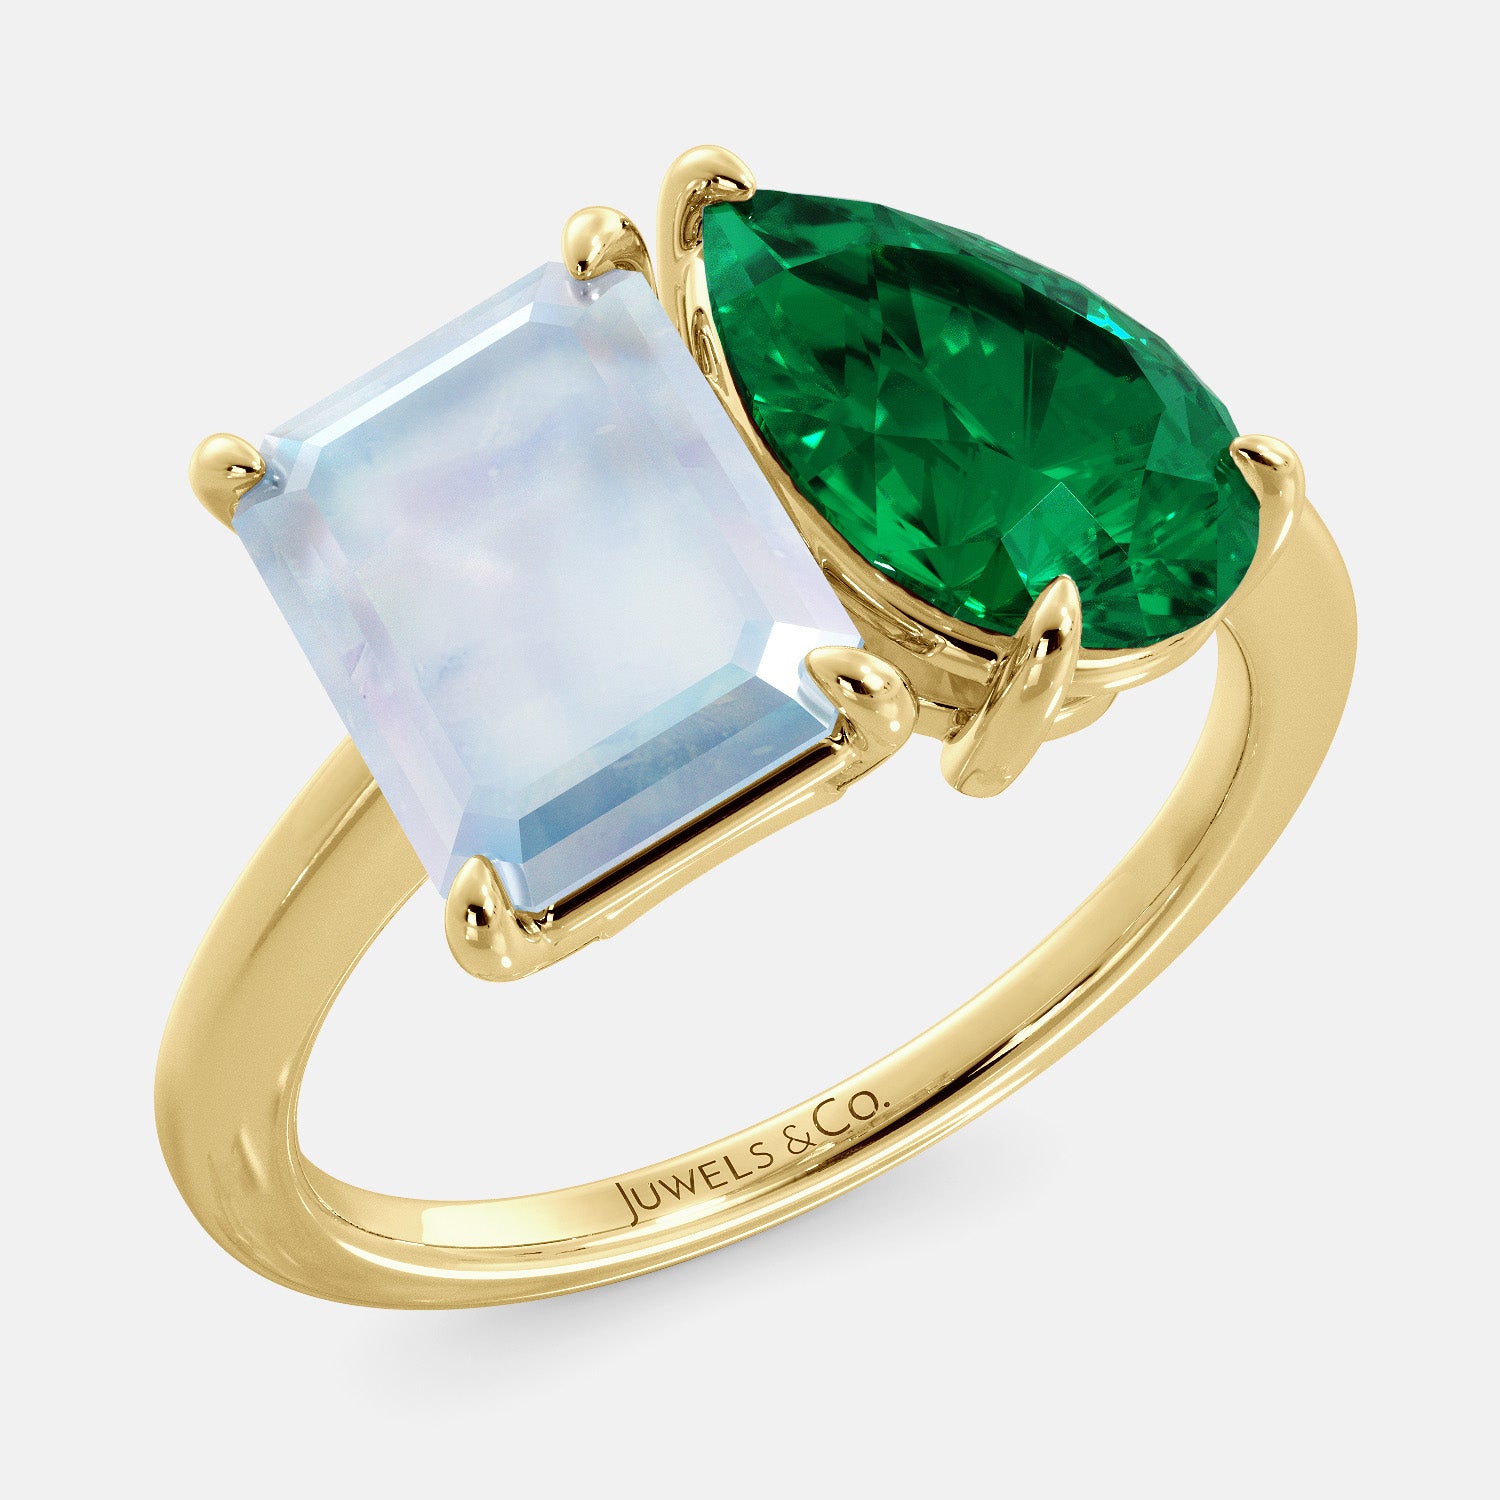 This image shows a toi et moi ring with a pear-shaped emerald and an emerald-cut moonstone. The ring is set in a 14k yellow gold band and is available in all sizes. The moonstone is a gemstone that is said to promote intuition, imagination, and creativity. The emerald is a gemstone that is said to promote love, compassion, and forgiveness. The toi et moi ring is a beautiful and unique way to show your love and commitment to someone special.